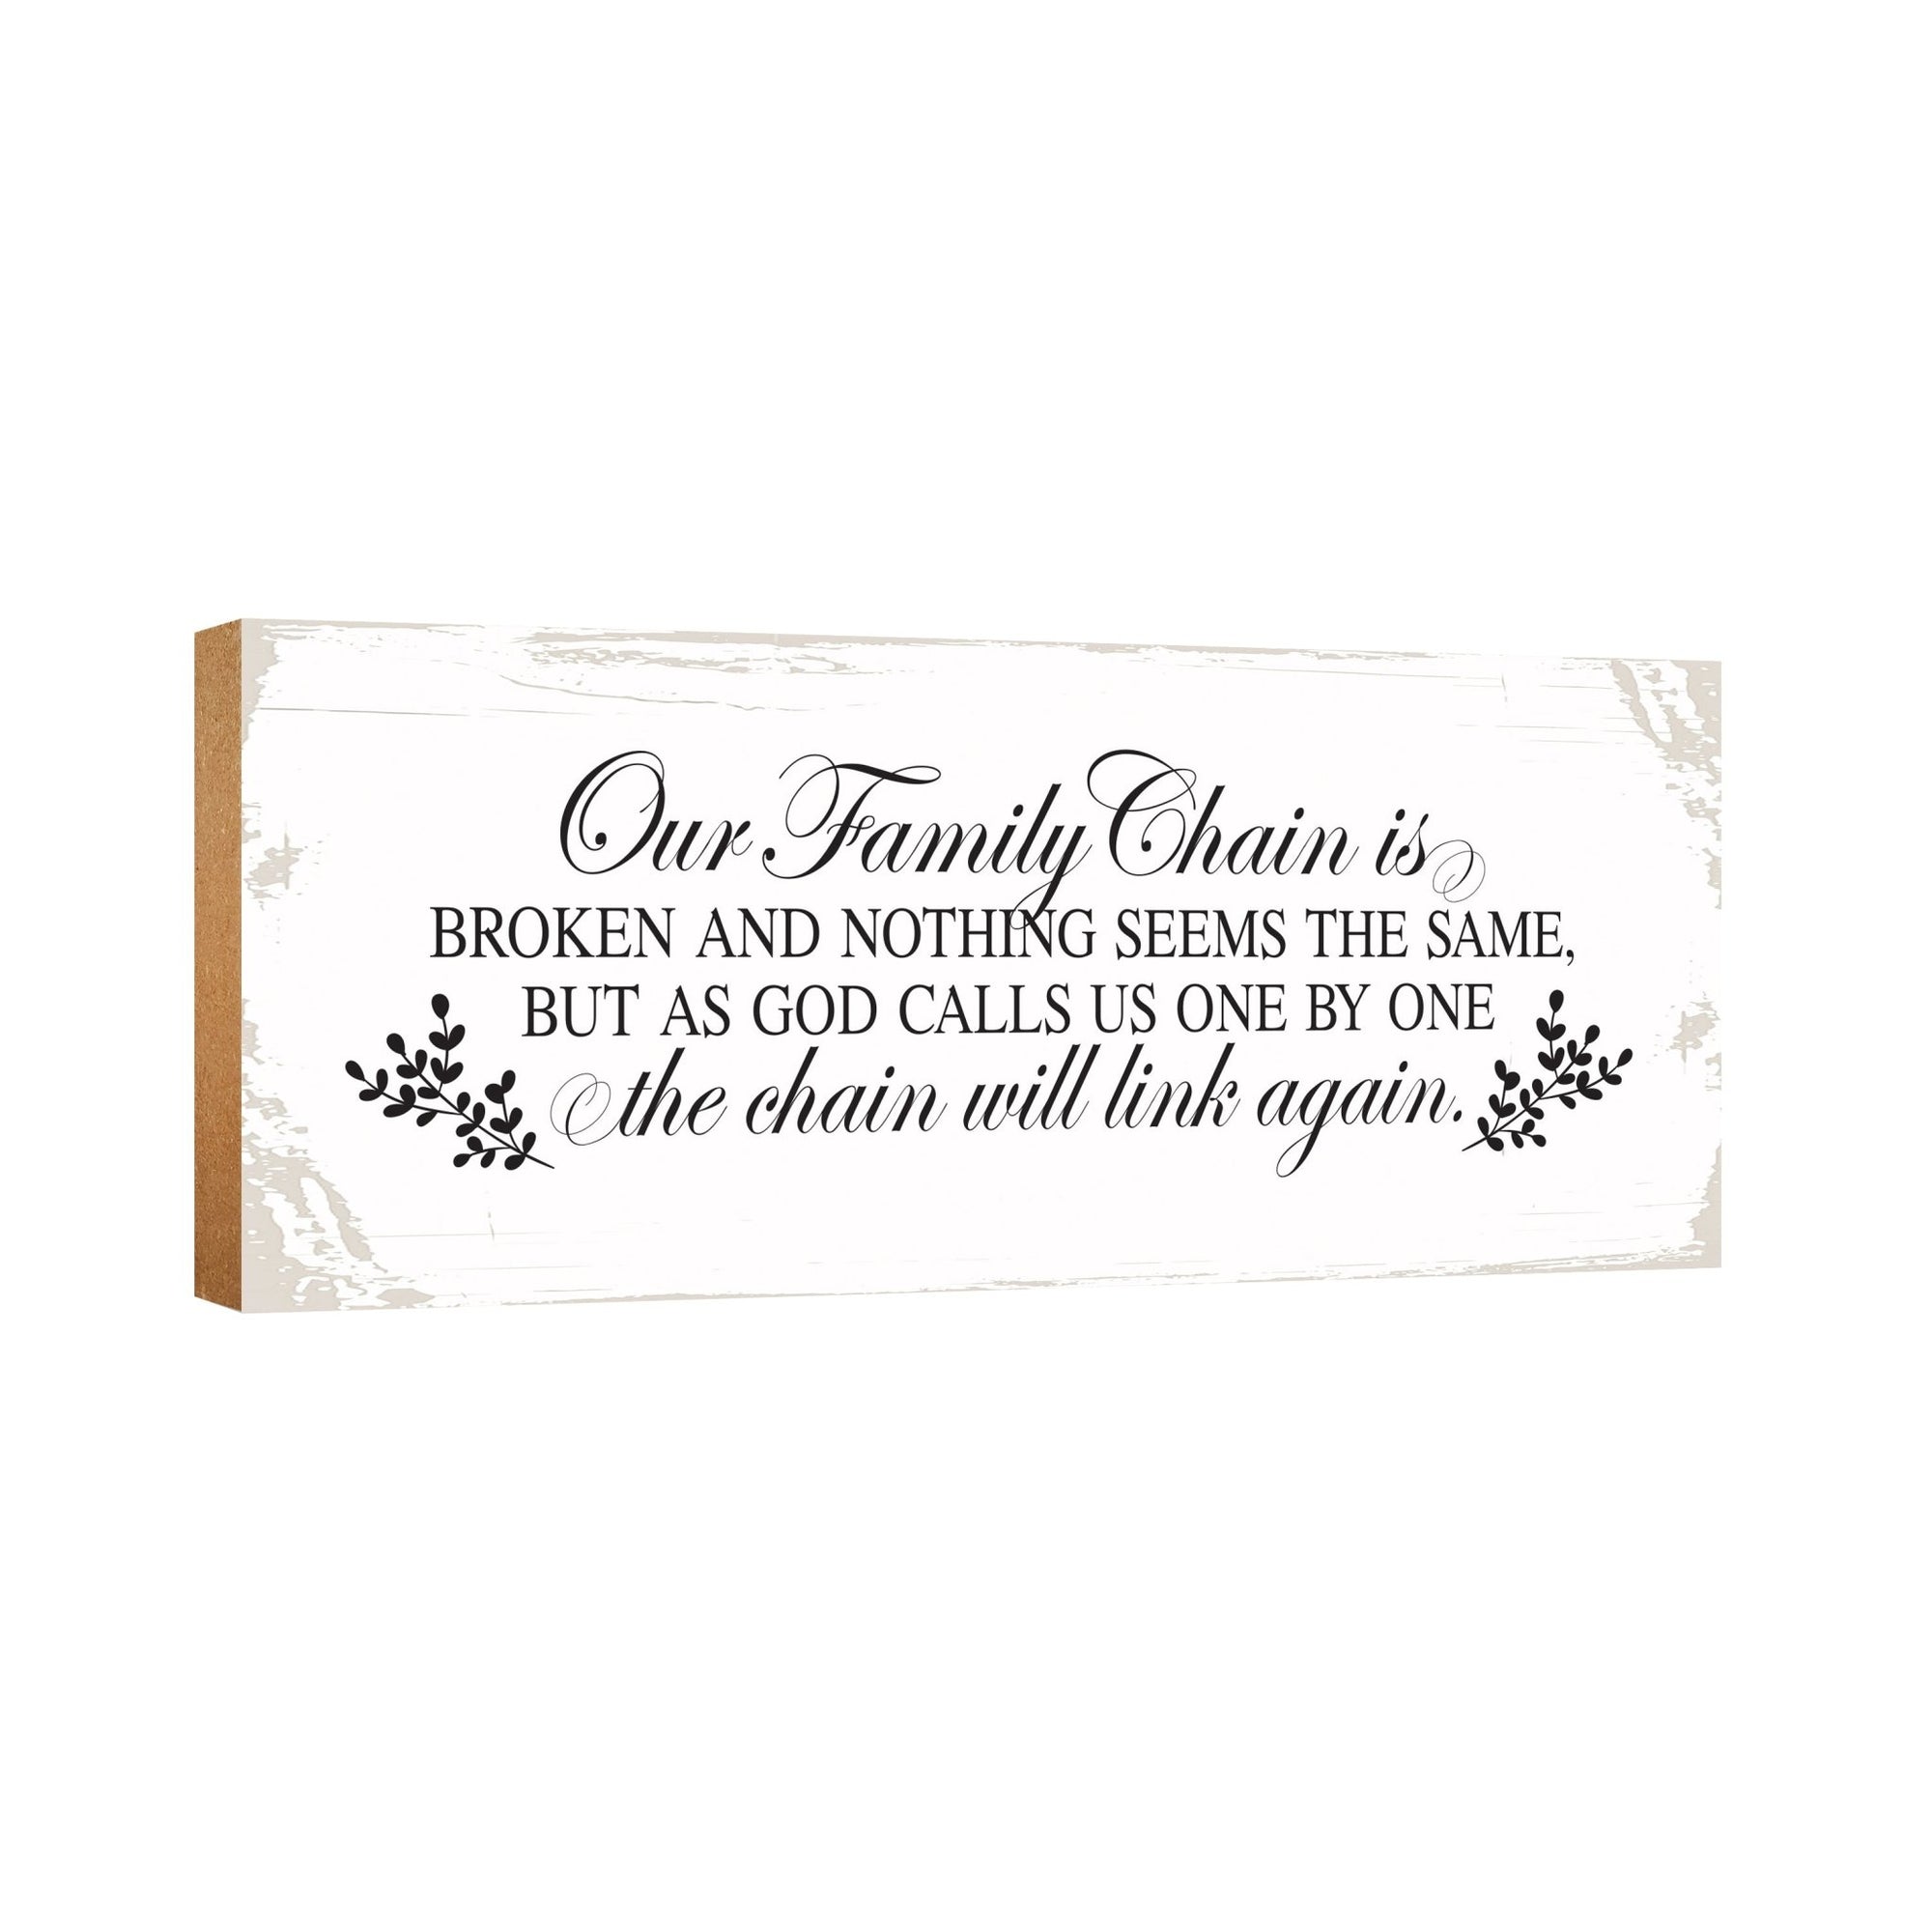 Modern Inspirational Pet Memorial 4x10 inches Wooden Sign (Our Family Chain) Tabletop Plaque Home Decoration Loss of Pet Bereavement Sympathy Keepsake - LifeSong Milestones